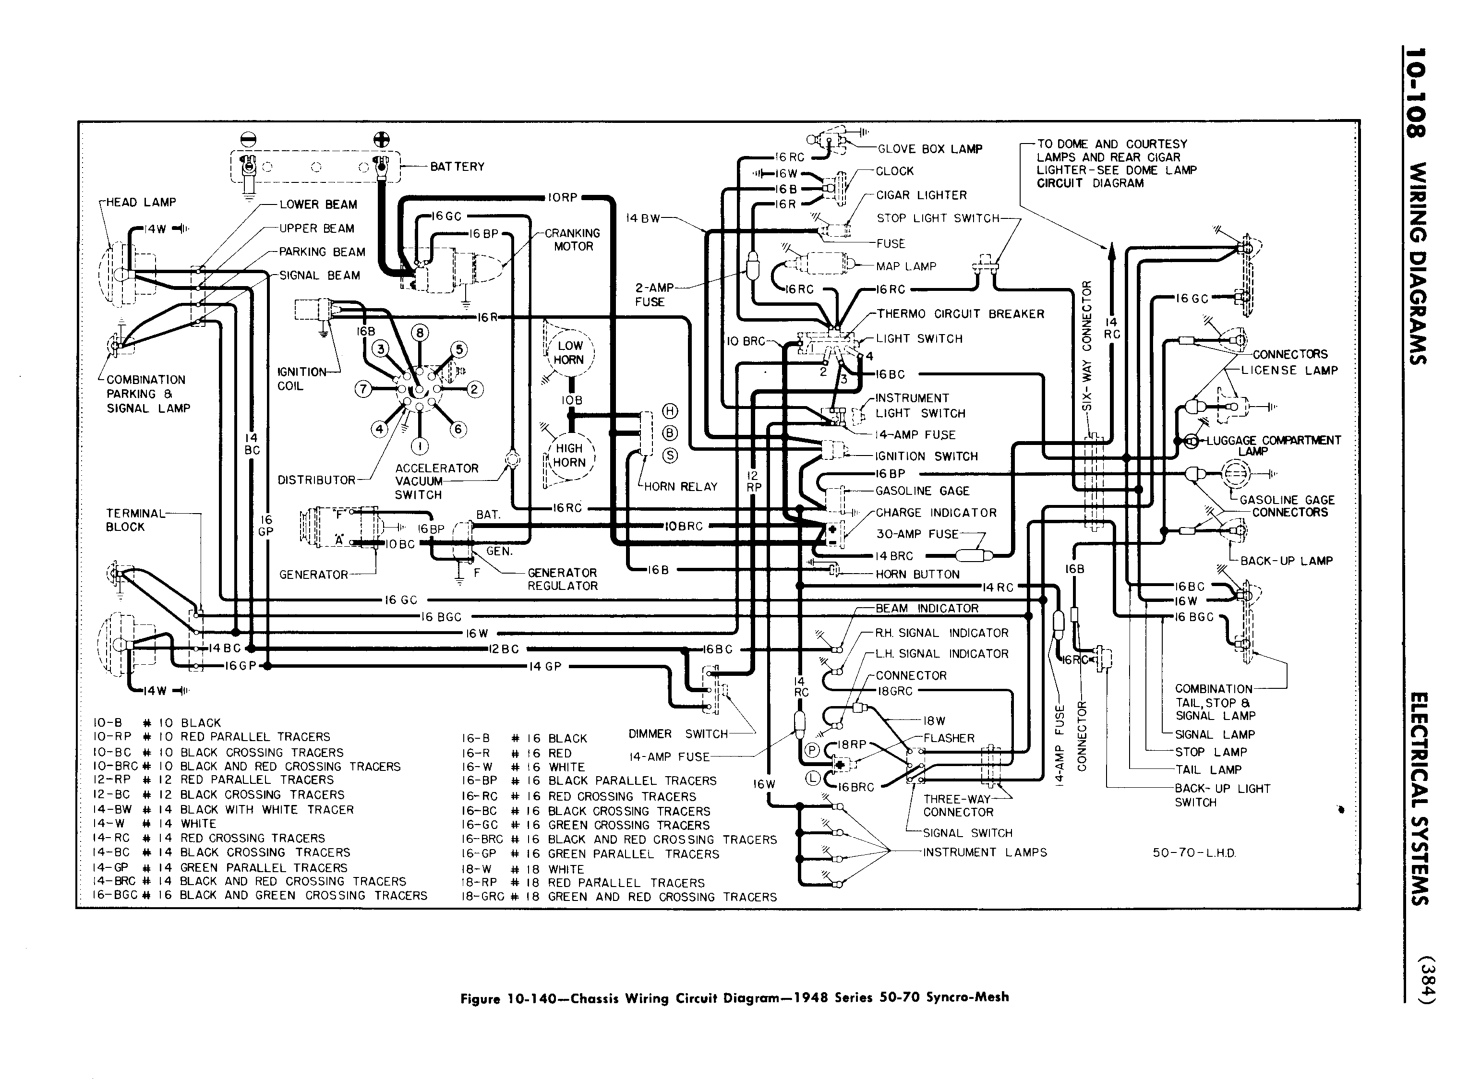 n_11 1948 Buick Shop Manual - Electrical Systems-108-108.jpg